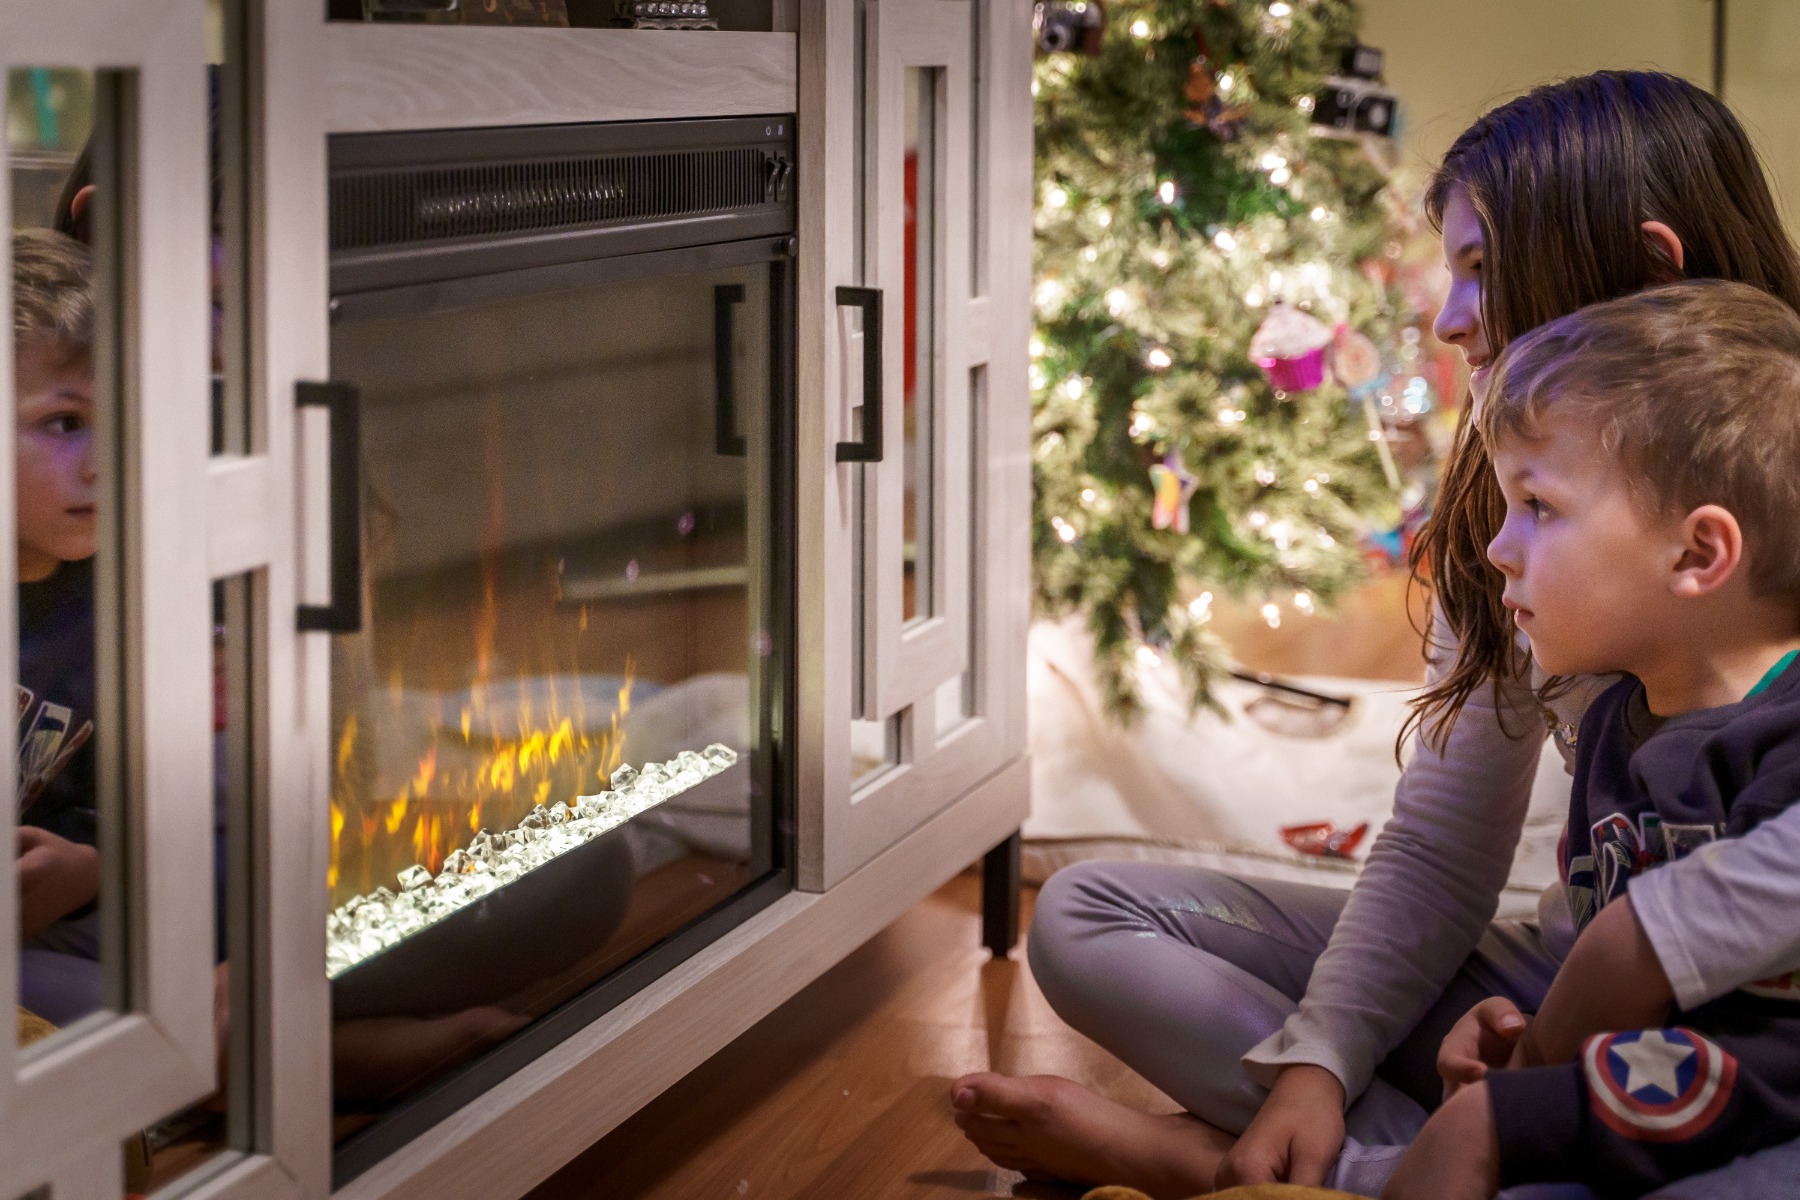 Two kids watching fireplace with front glass